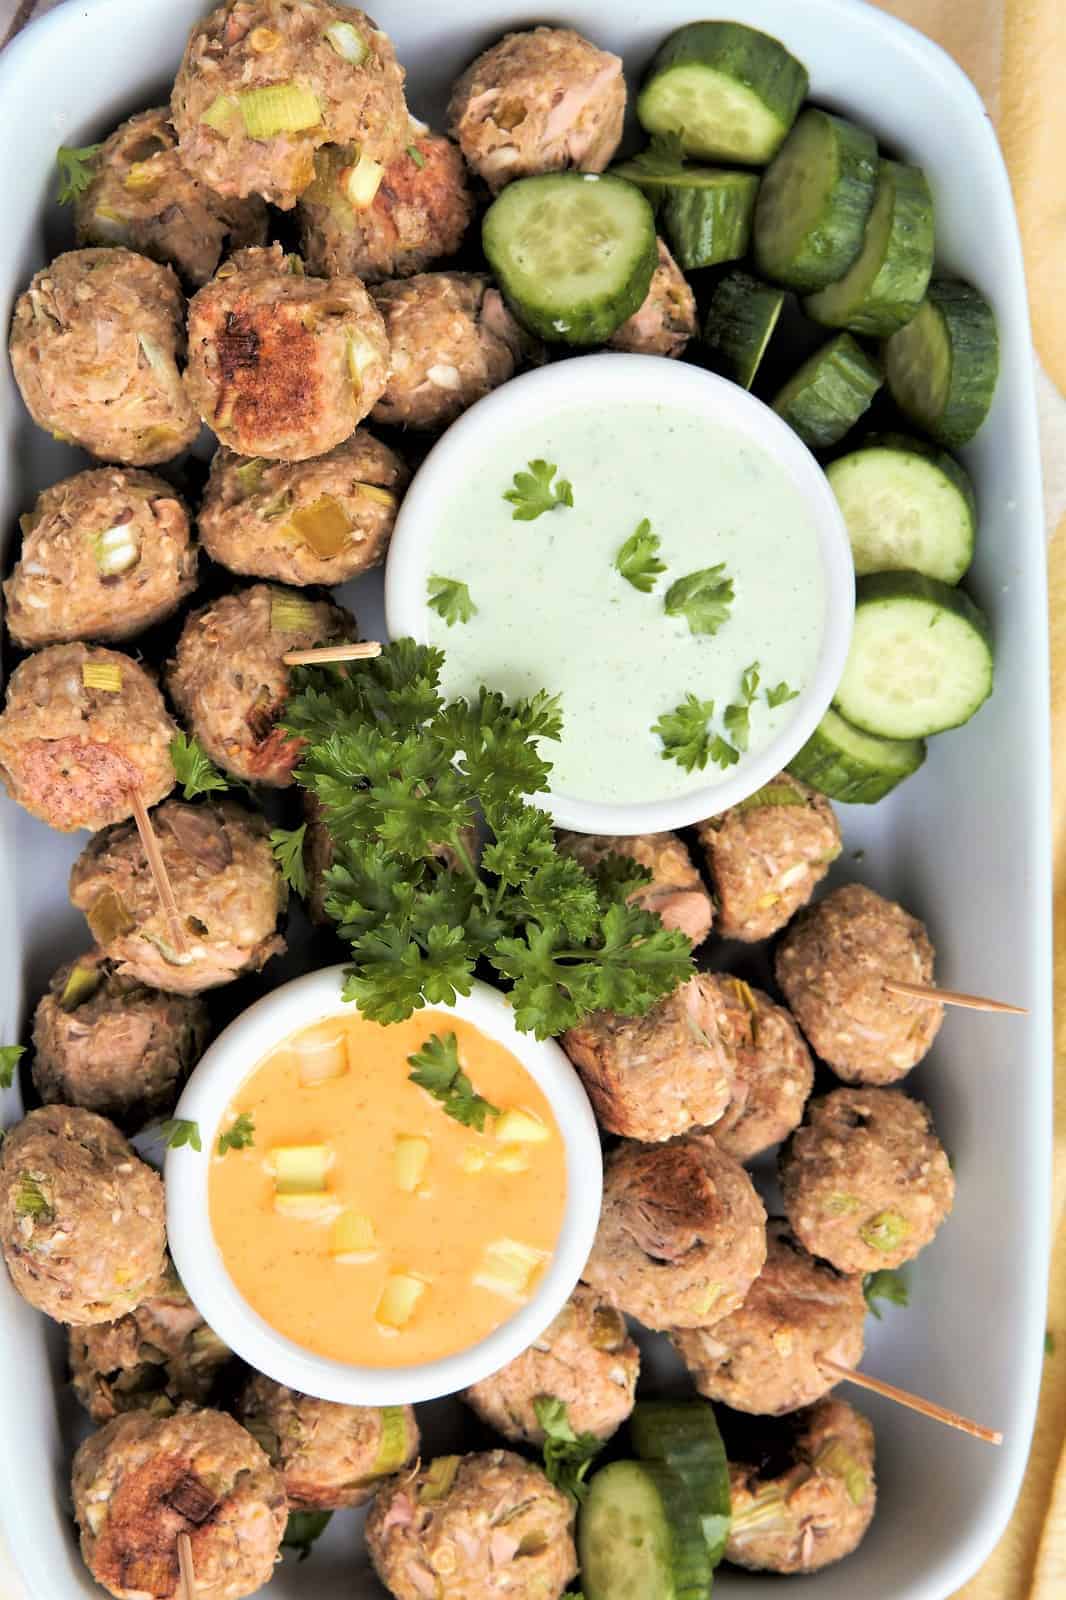 Vegan Meatball Appetizers With Cucumber Dill Dip